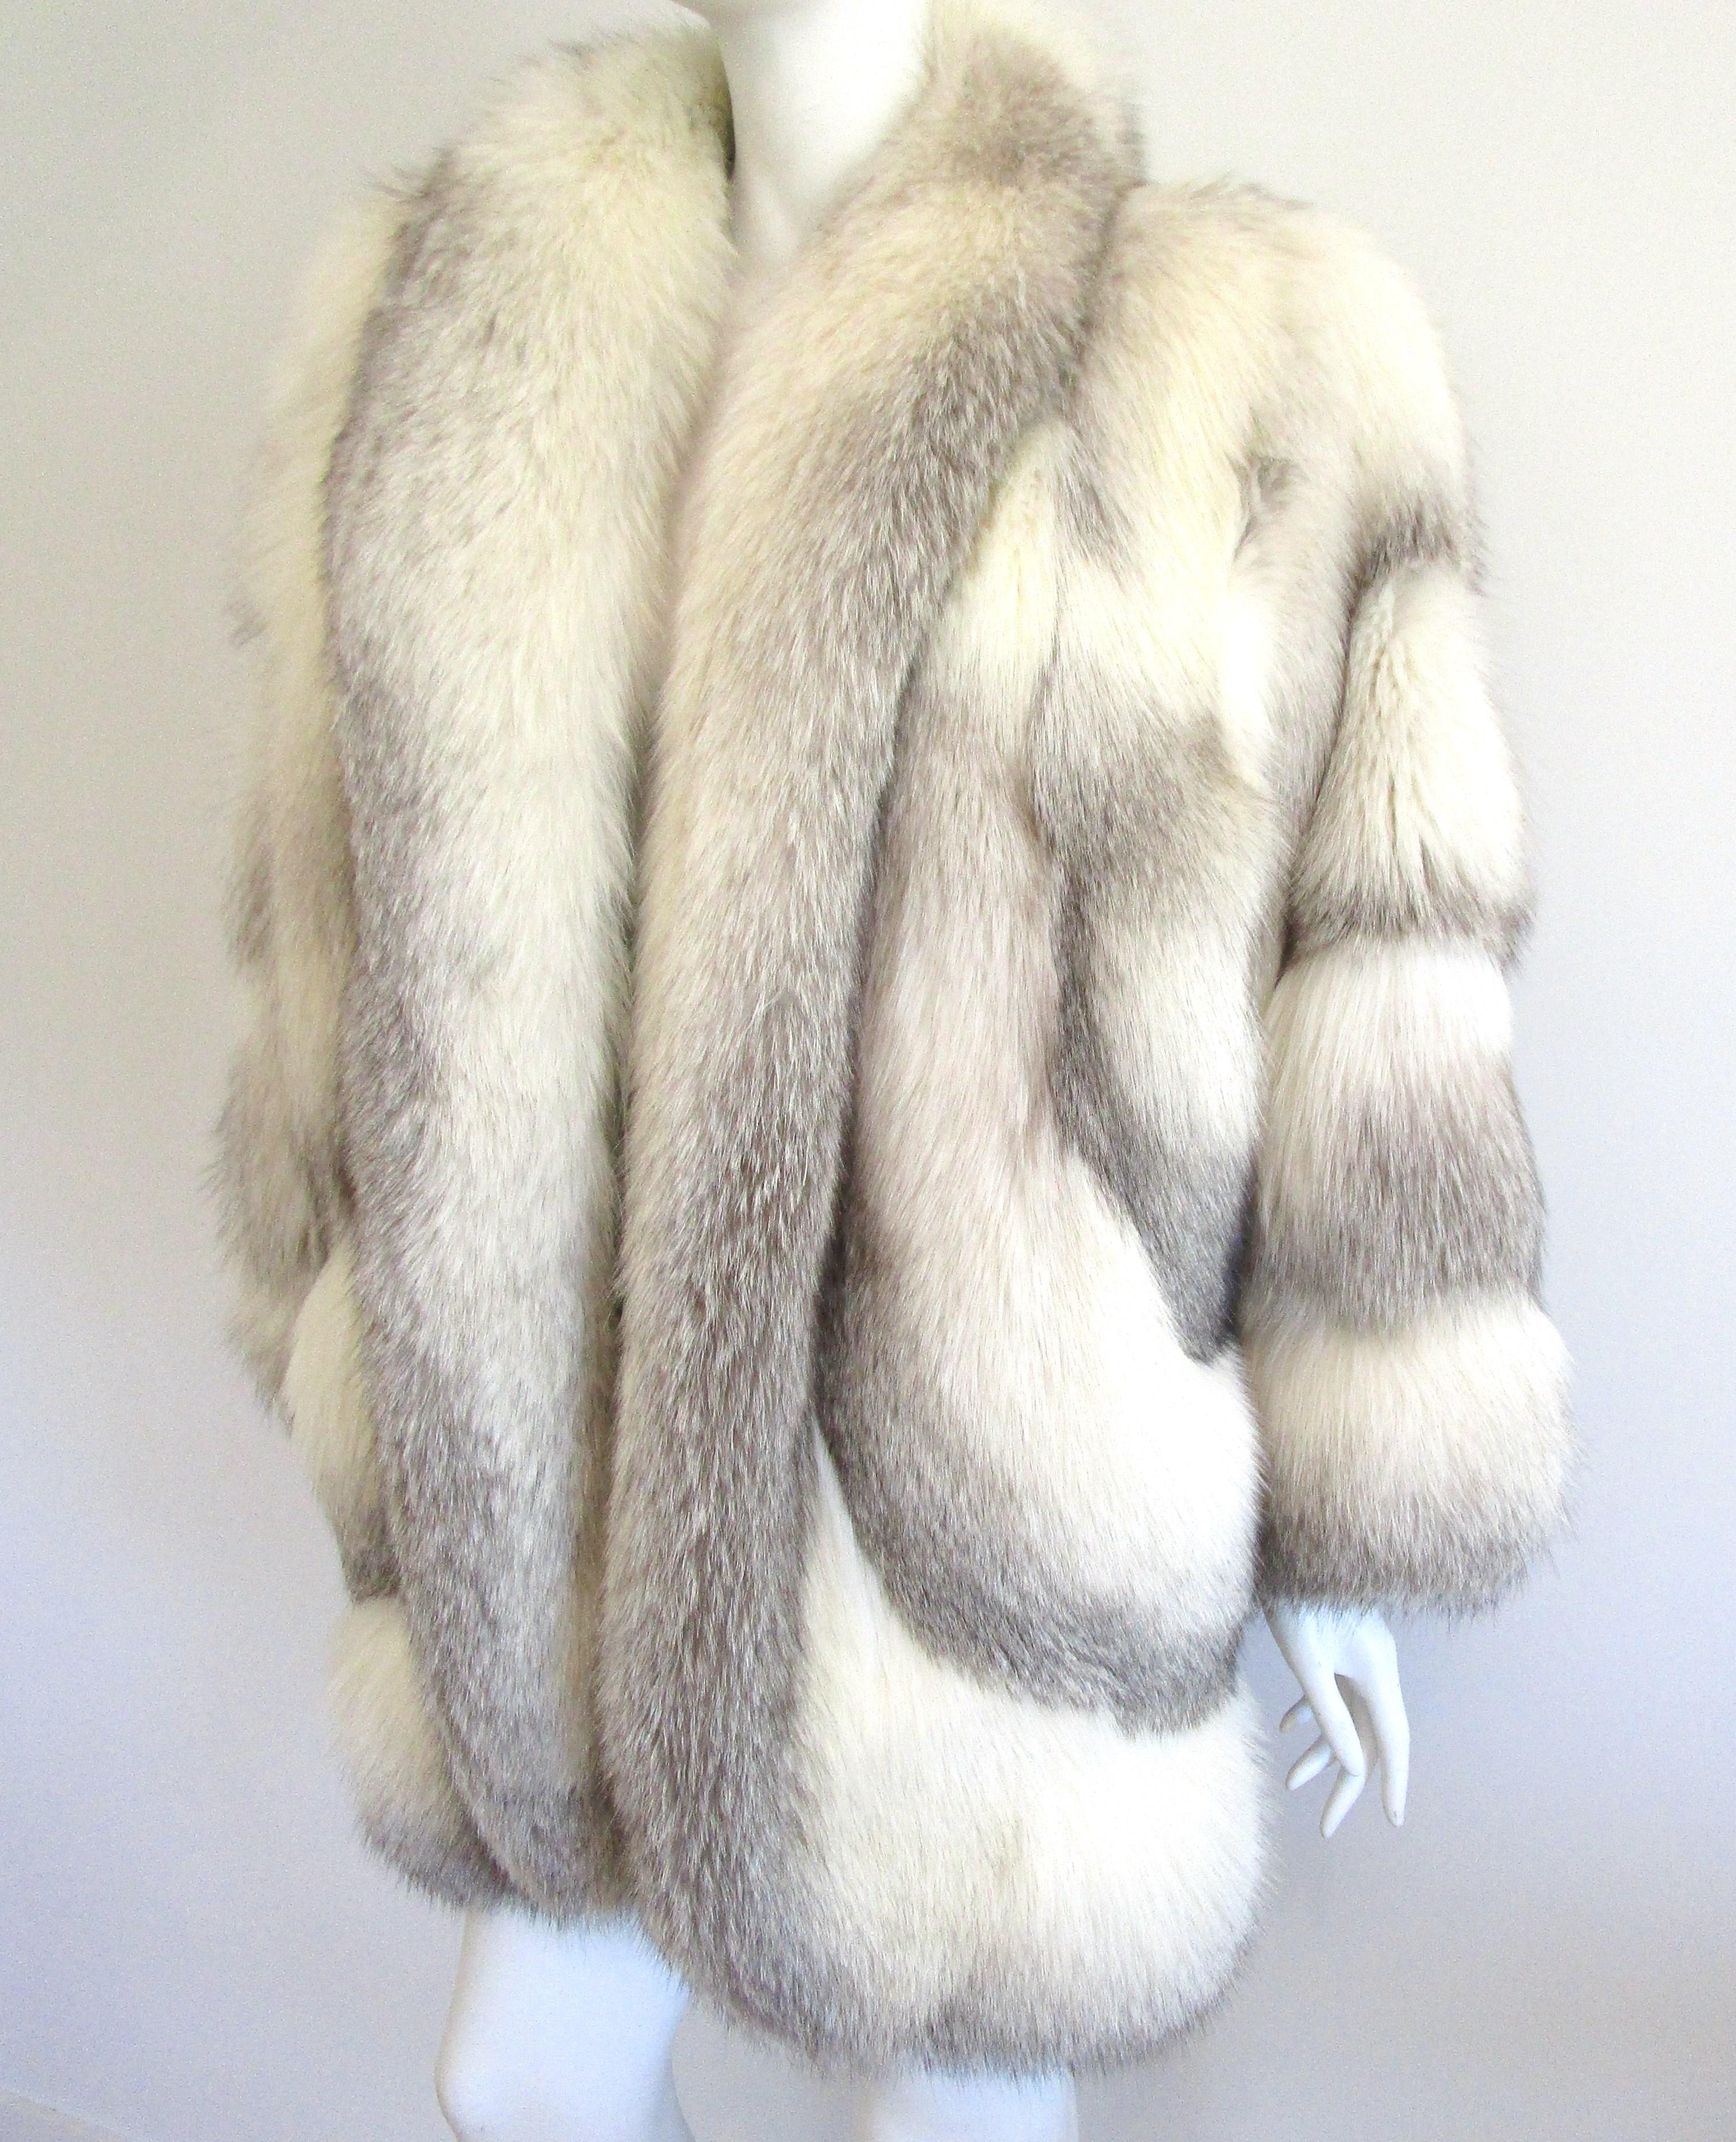 Stunning White and silver tipped fox jacket. Detailing is amazing, scalloped edge on the bottom of the jacket. Dolman sleeves. Slit pockets. One hook and eye closure. Simple Grey lining. Fur is soft and supple. Lining needs a bit of a mend (photos)